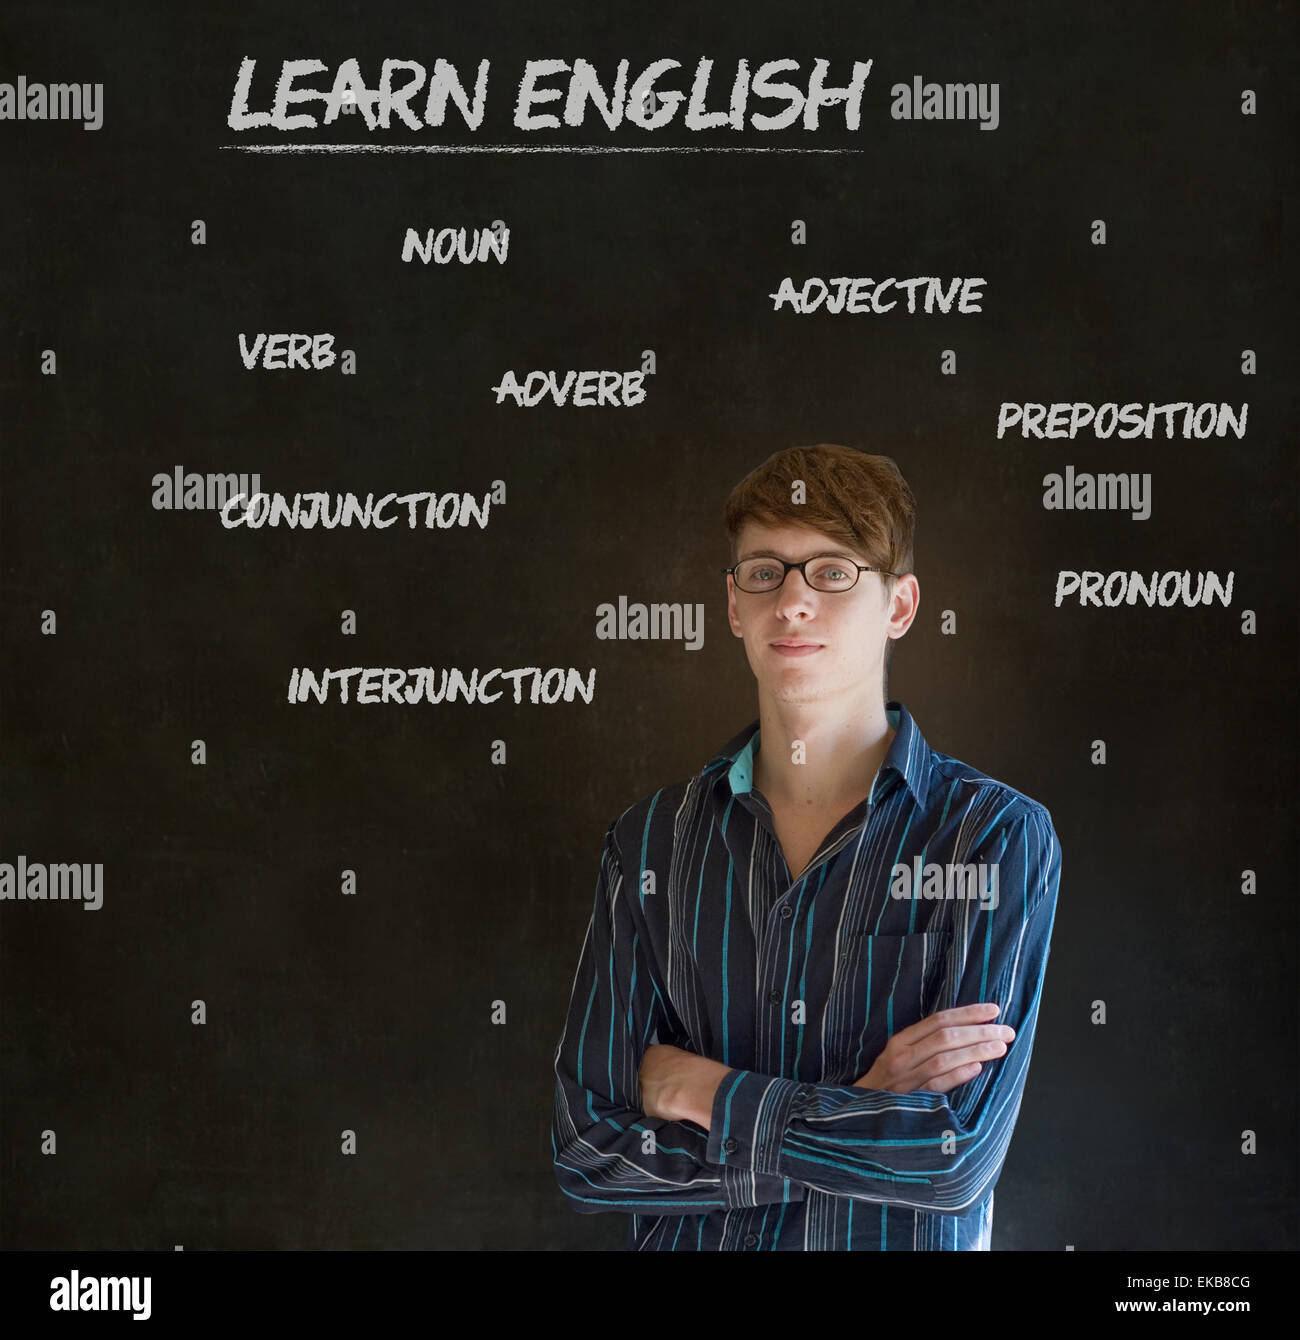 Learn English teacher with chalk background Stock Photo